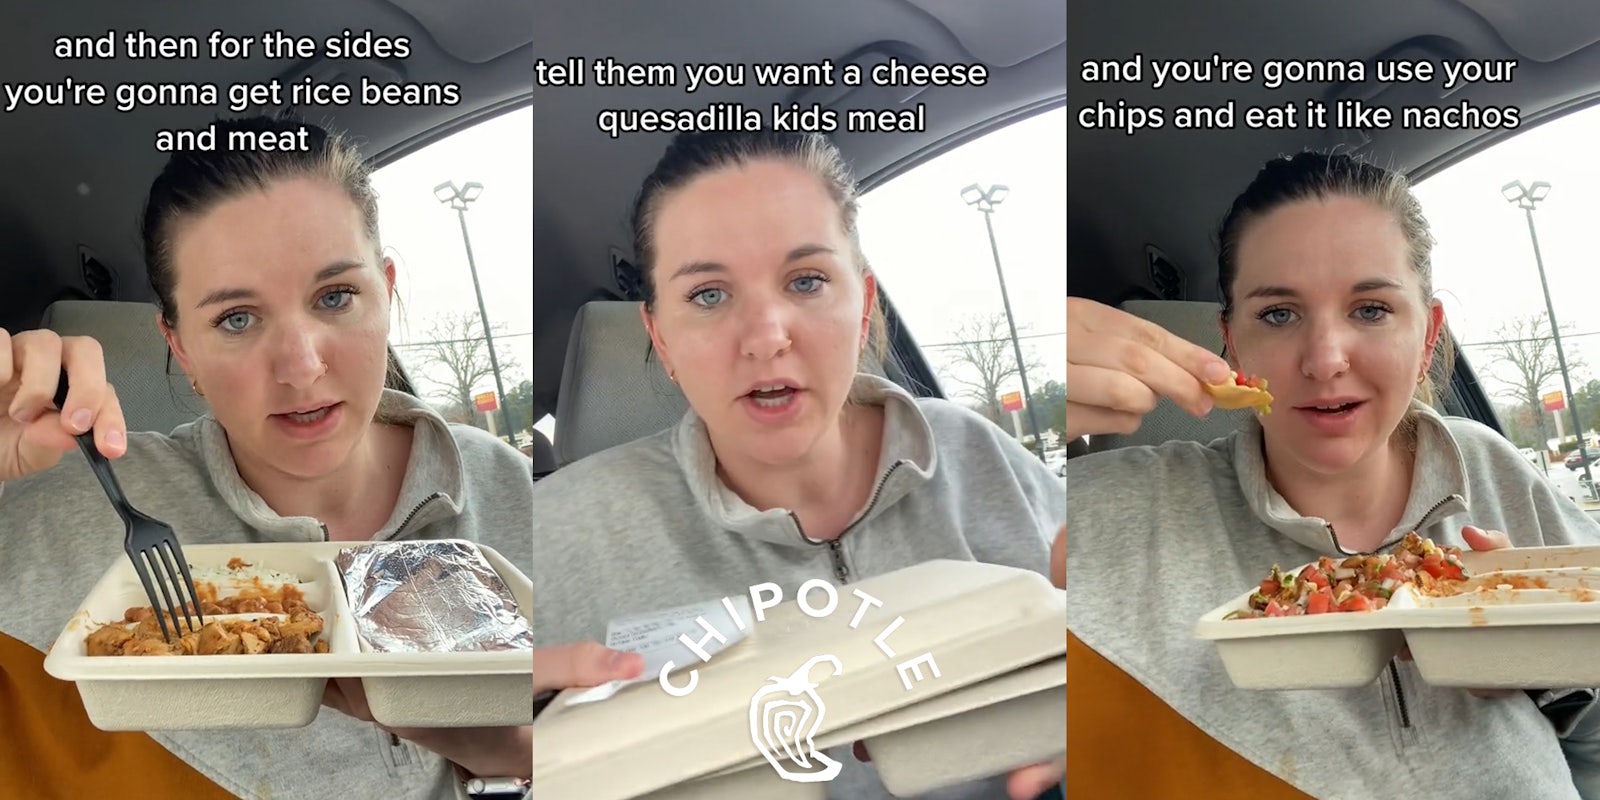 woman holding Chipotle food in car with caption 'and then for the sides you're gonna get rice beans and meat' (l) woman holding Chipotle food in car with caption 'tell them you want a cheese quesadilla kids meal' with Chipotle logo at bottom (c) woman holding Chipotle food in car with caption 'and you're gonna use your chips and eat it like nachos' (r)